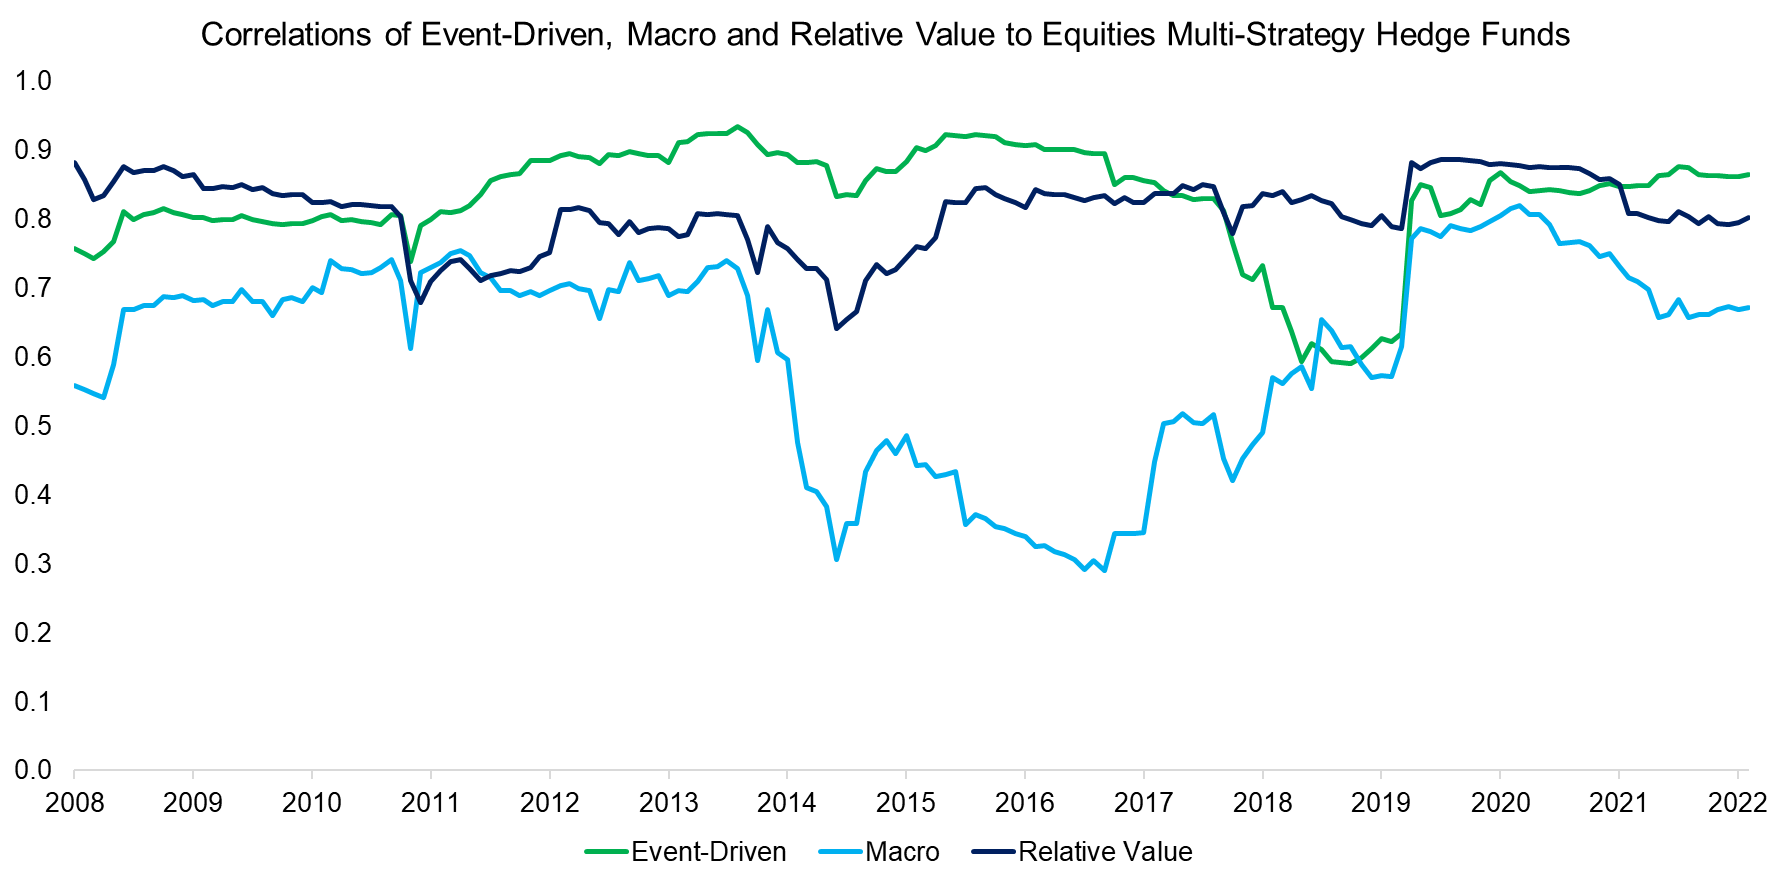 Correlations of Event-Driven, Macro and Relative Value to Equities Multi-Strategy Hedge Funds